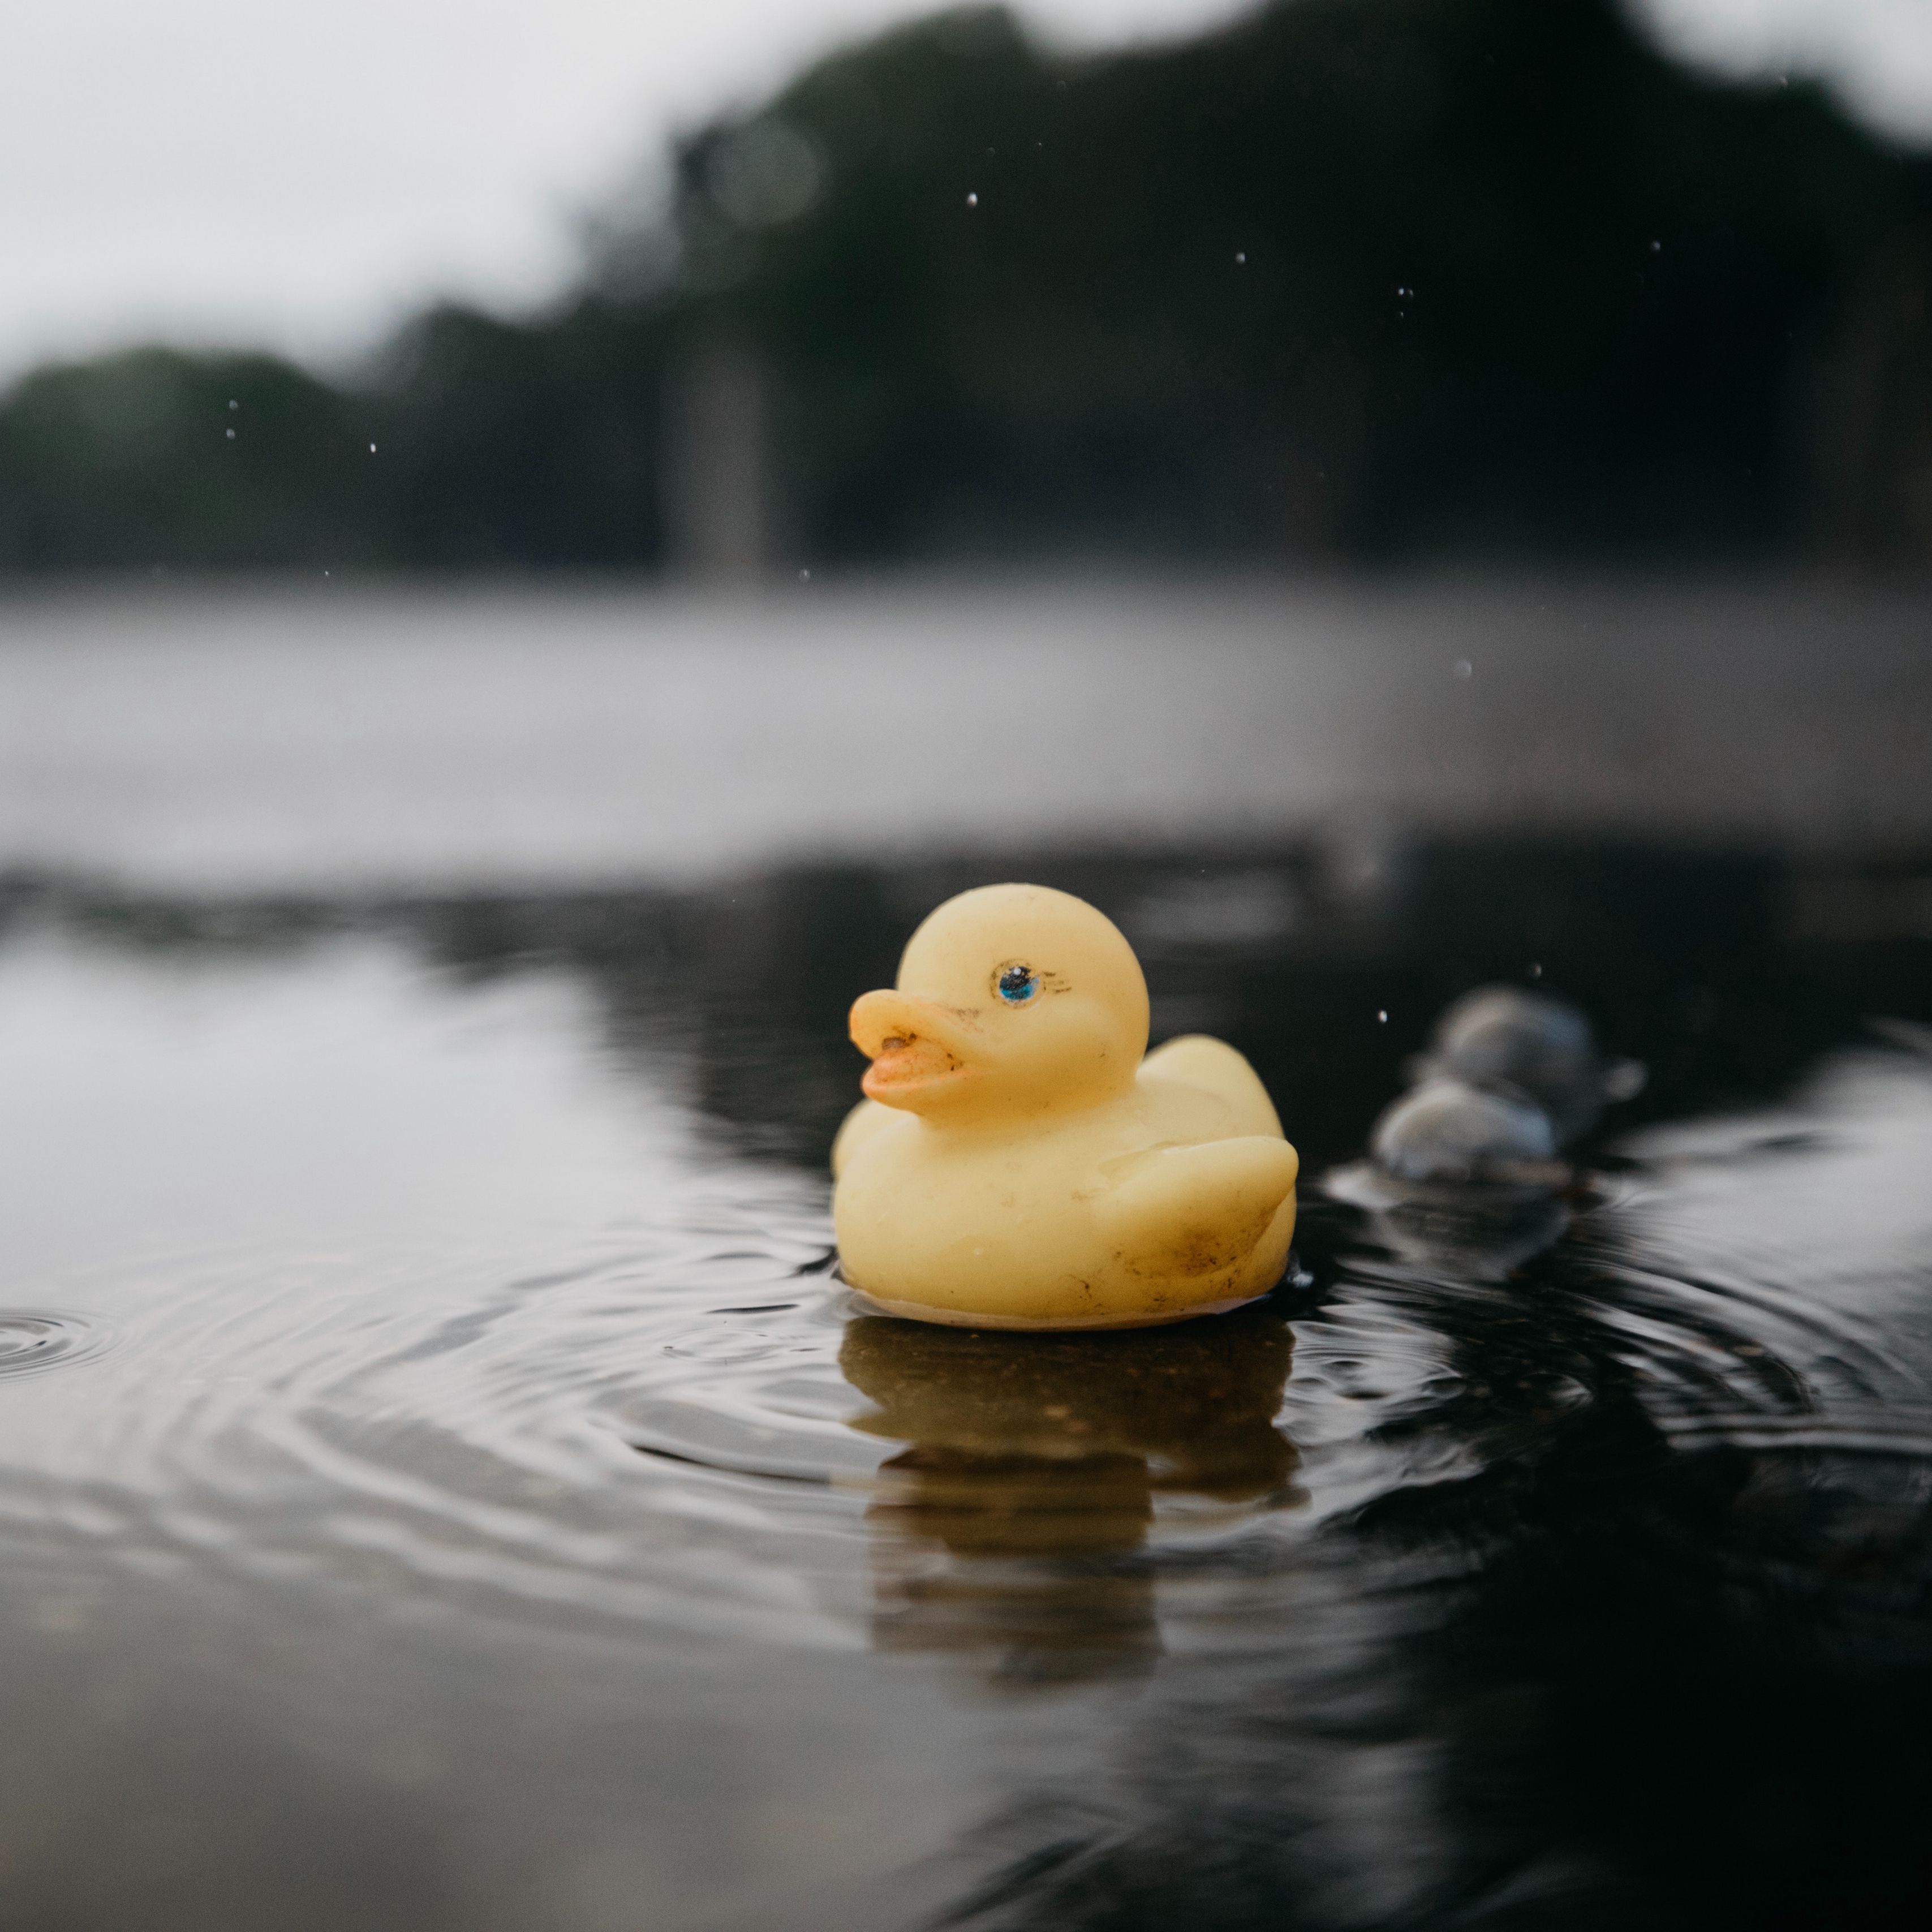 Download wallpaper 3415x3415 rubber duck, duck, toy, puddle, water ipad pro 12.9 retina for parallax HD background